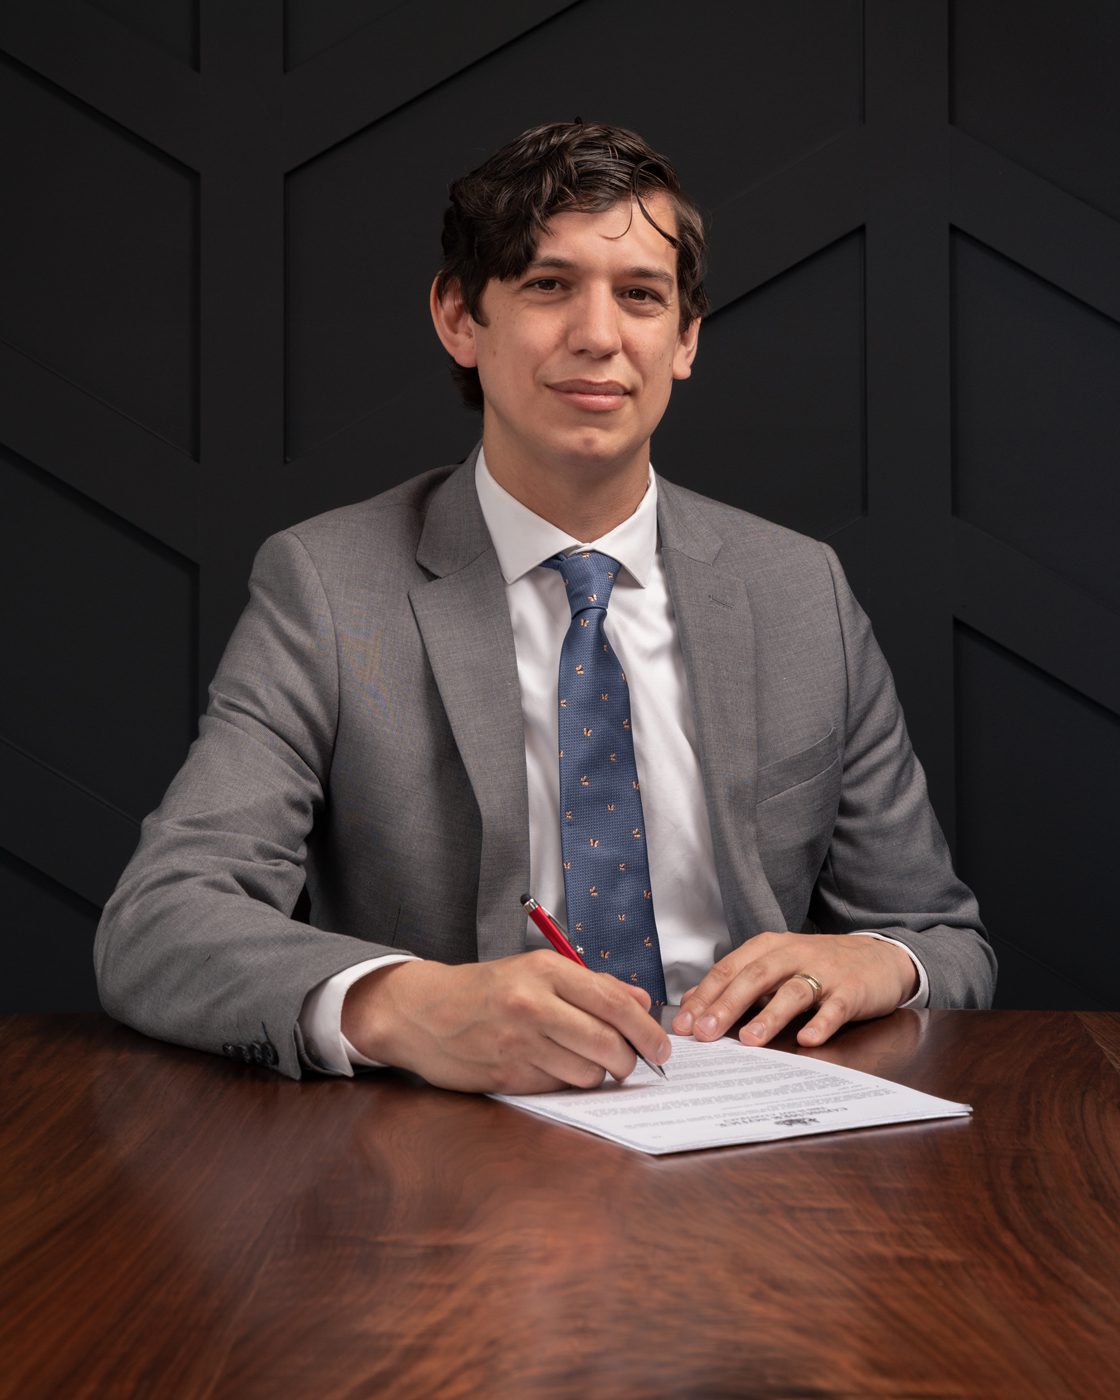 Estate Planning Attorney Jonathan Atkinson at a desk with legal papers